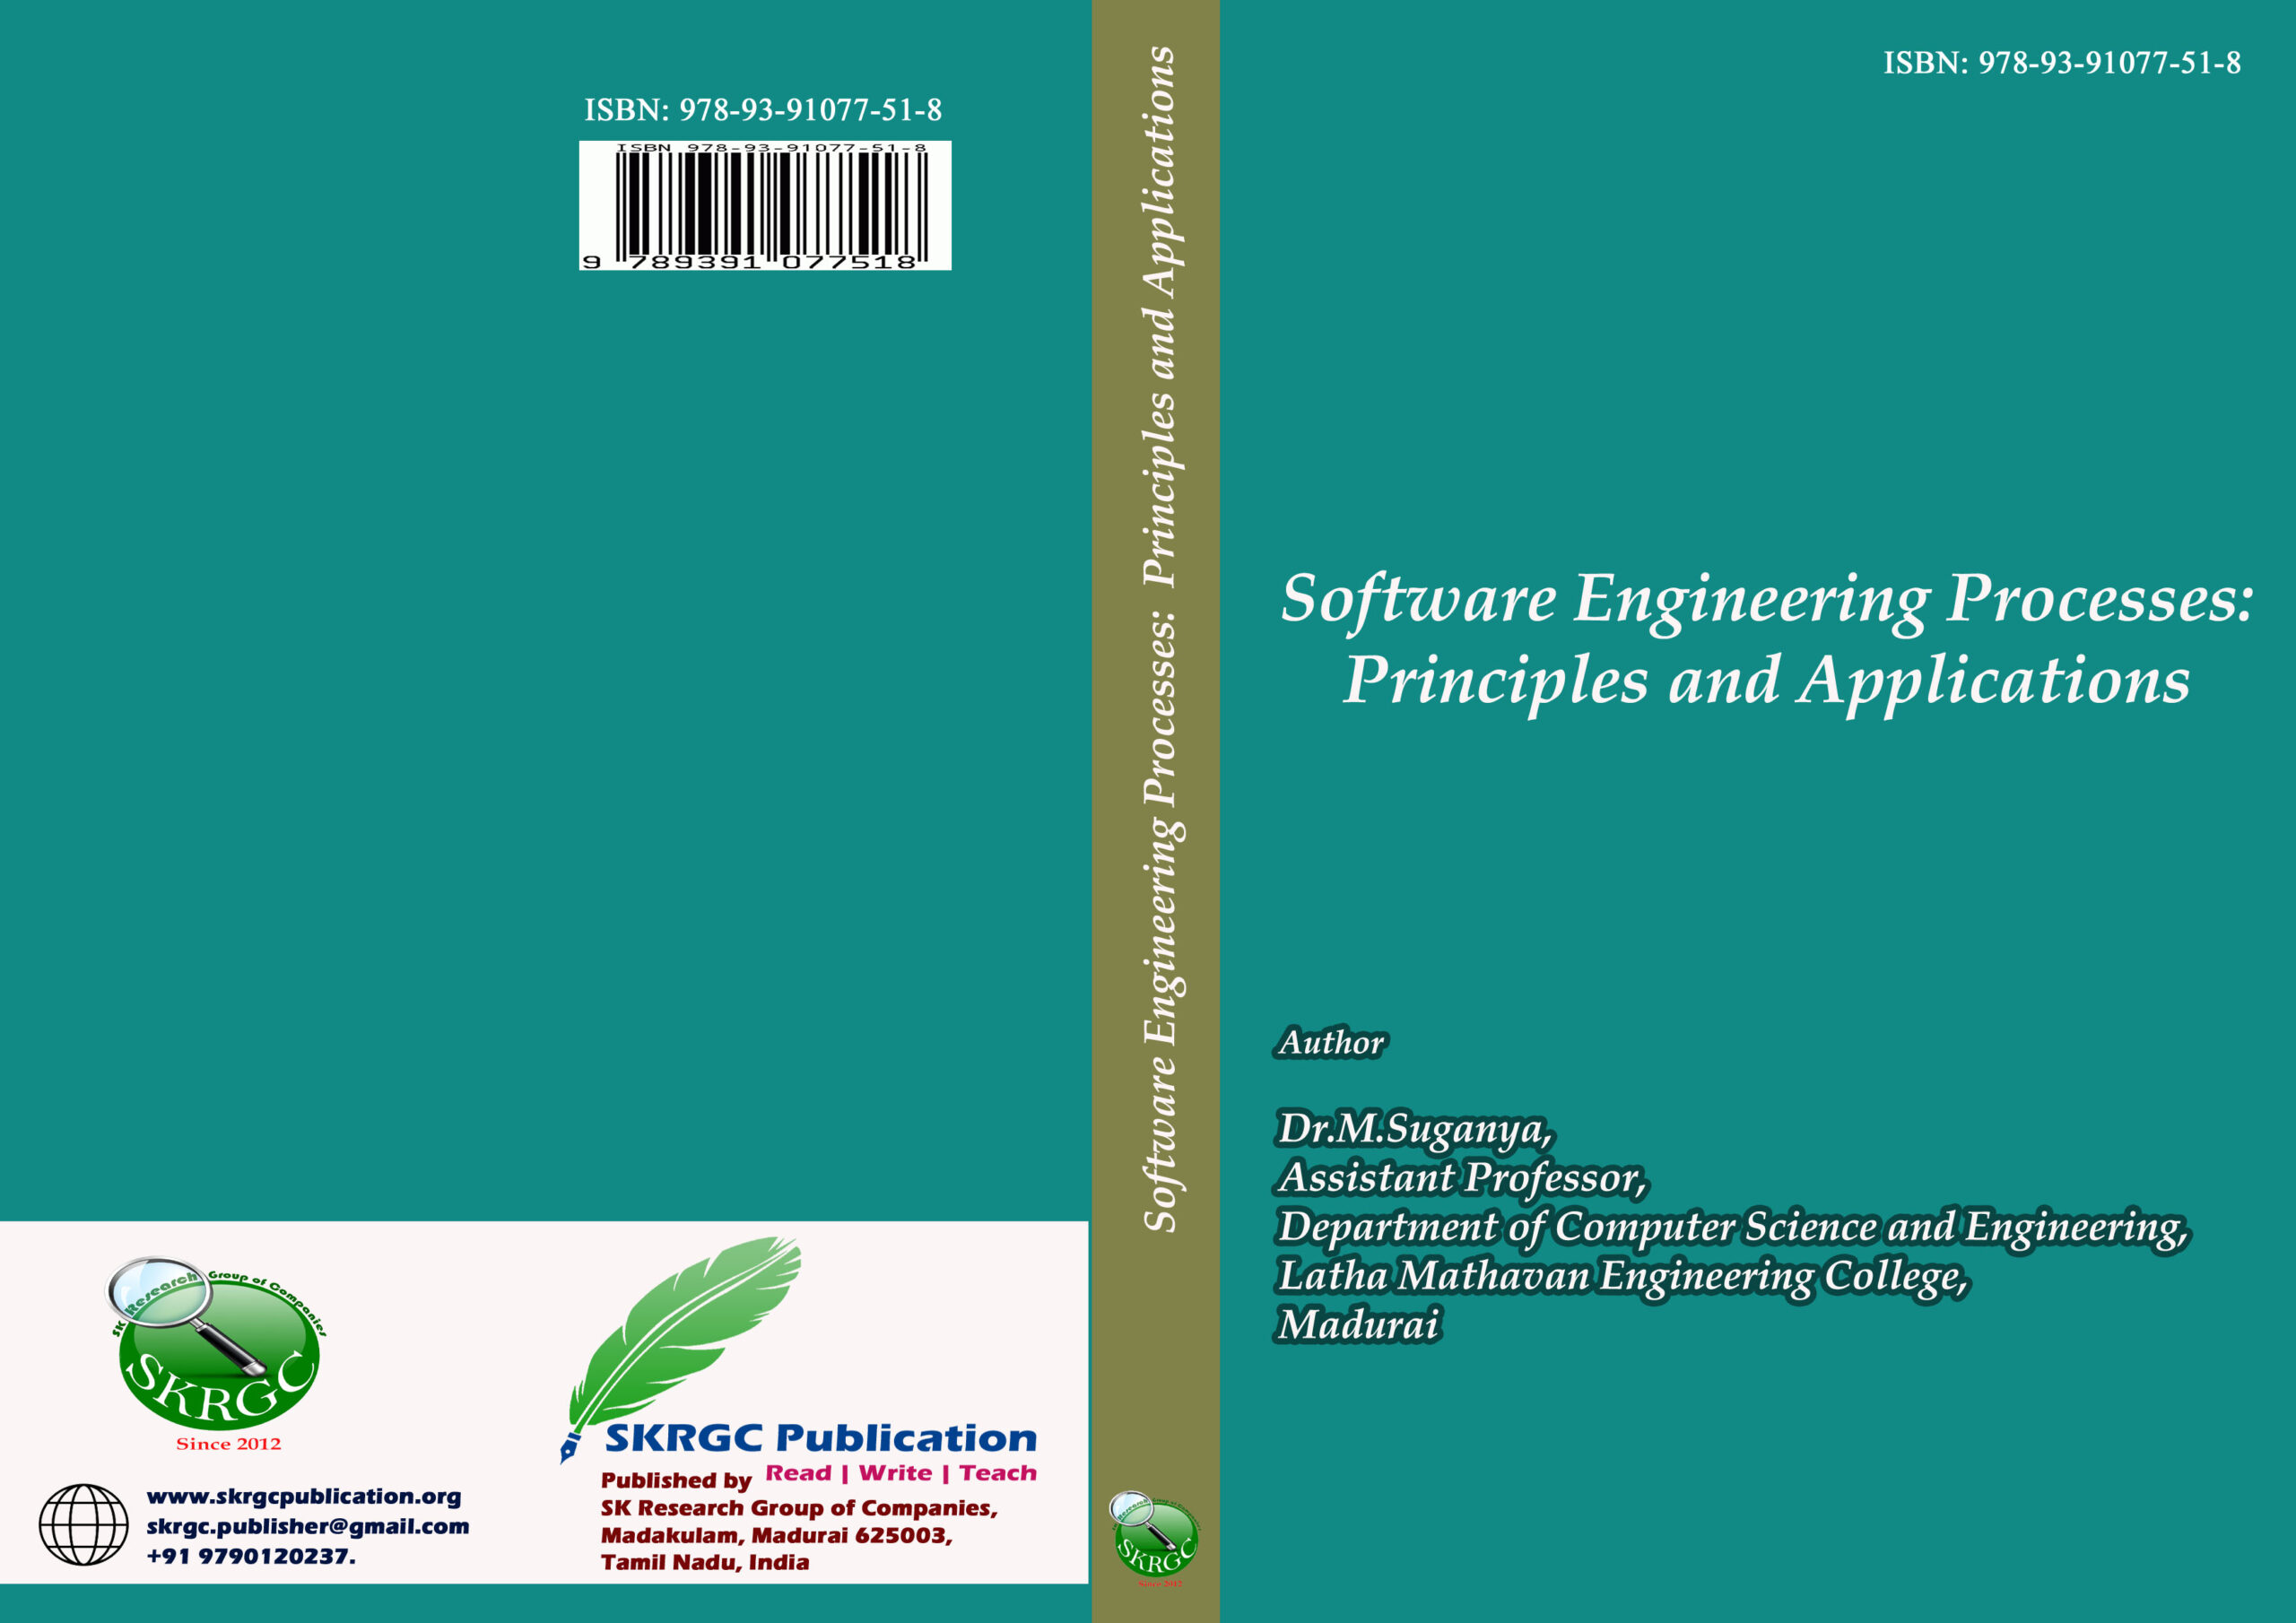 Software Engineering Processes: Principles and Applications